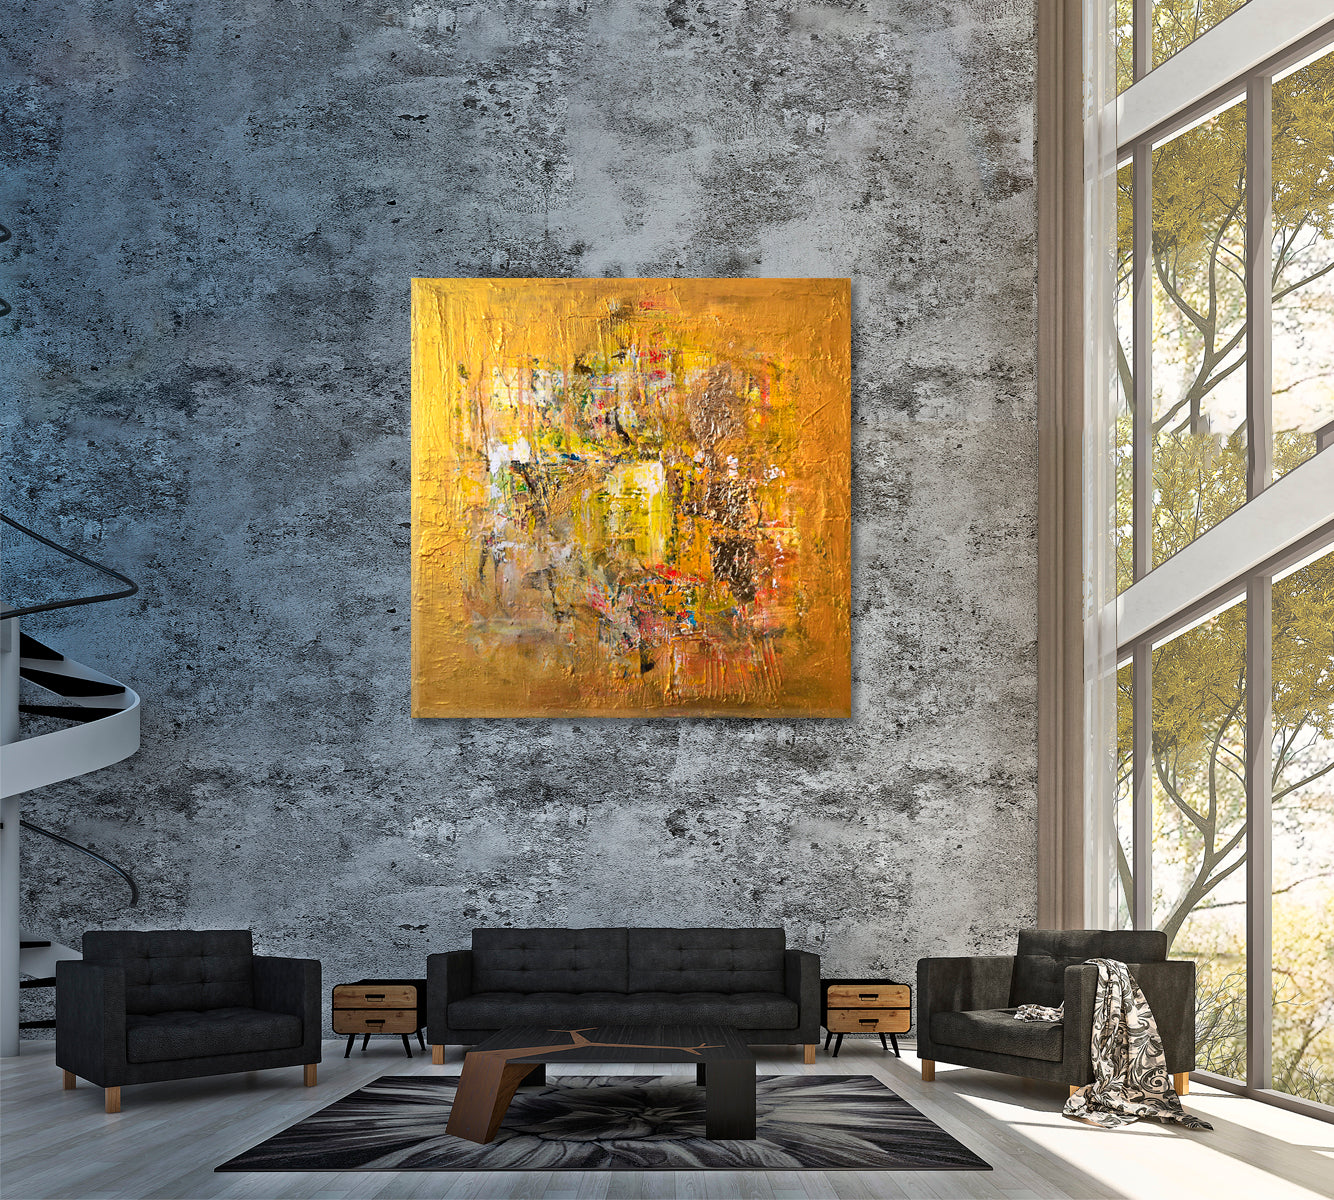 Golden Abstract Sketch Canvas Print ArtLexy 1 Panel 12"x12" inches 